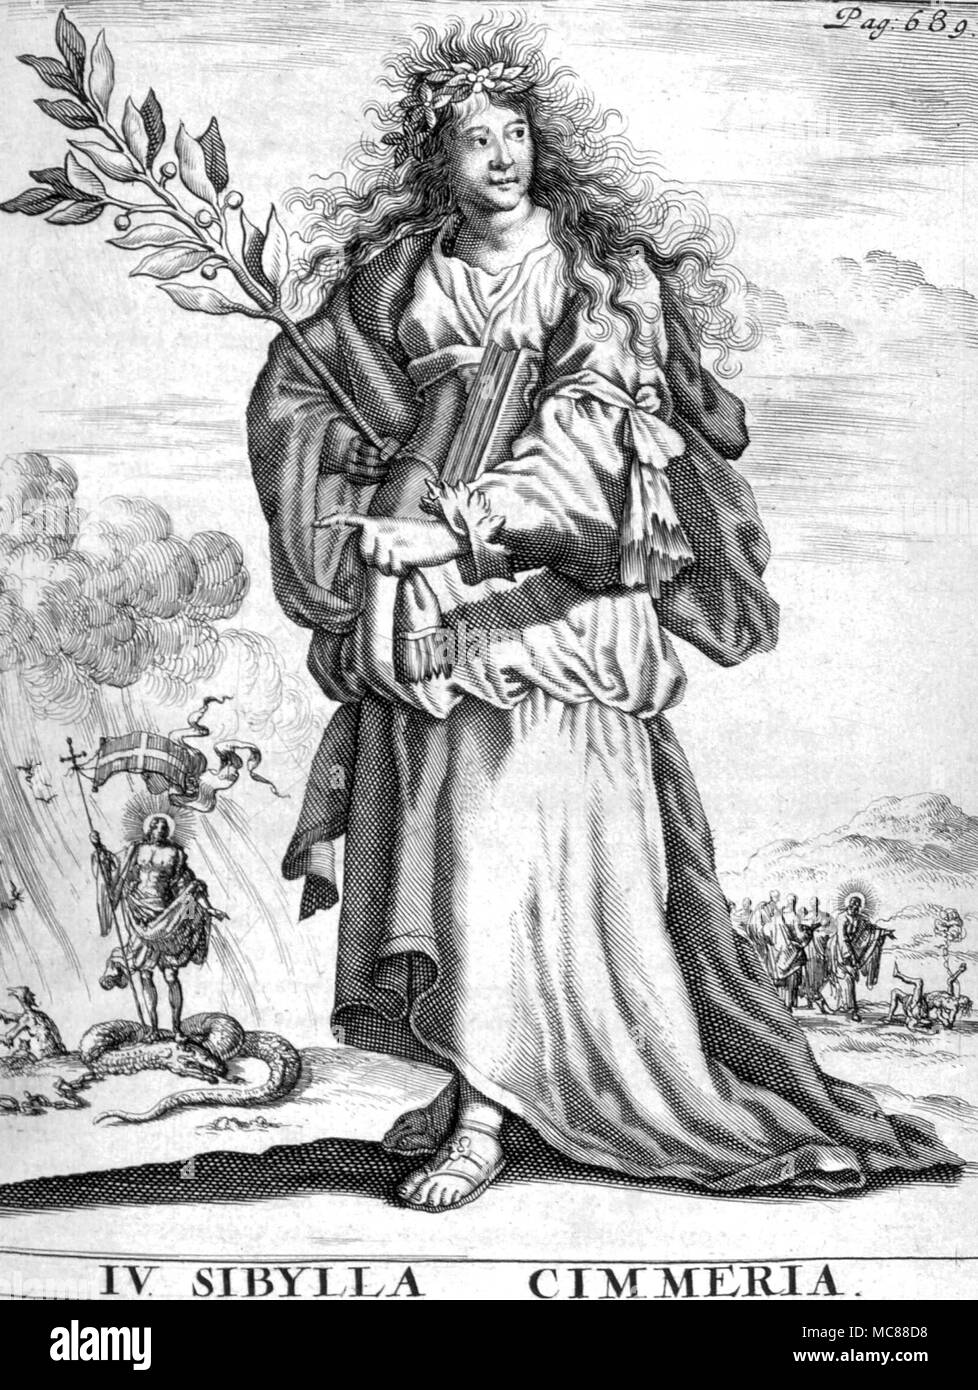 PREDICTIONS AND PROPHECY The Sibyl of Cimmeria from the 1685 Amsterdam edition of 'Spiegel der Sibyllen' Stock Photo